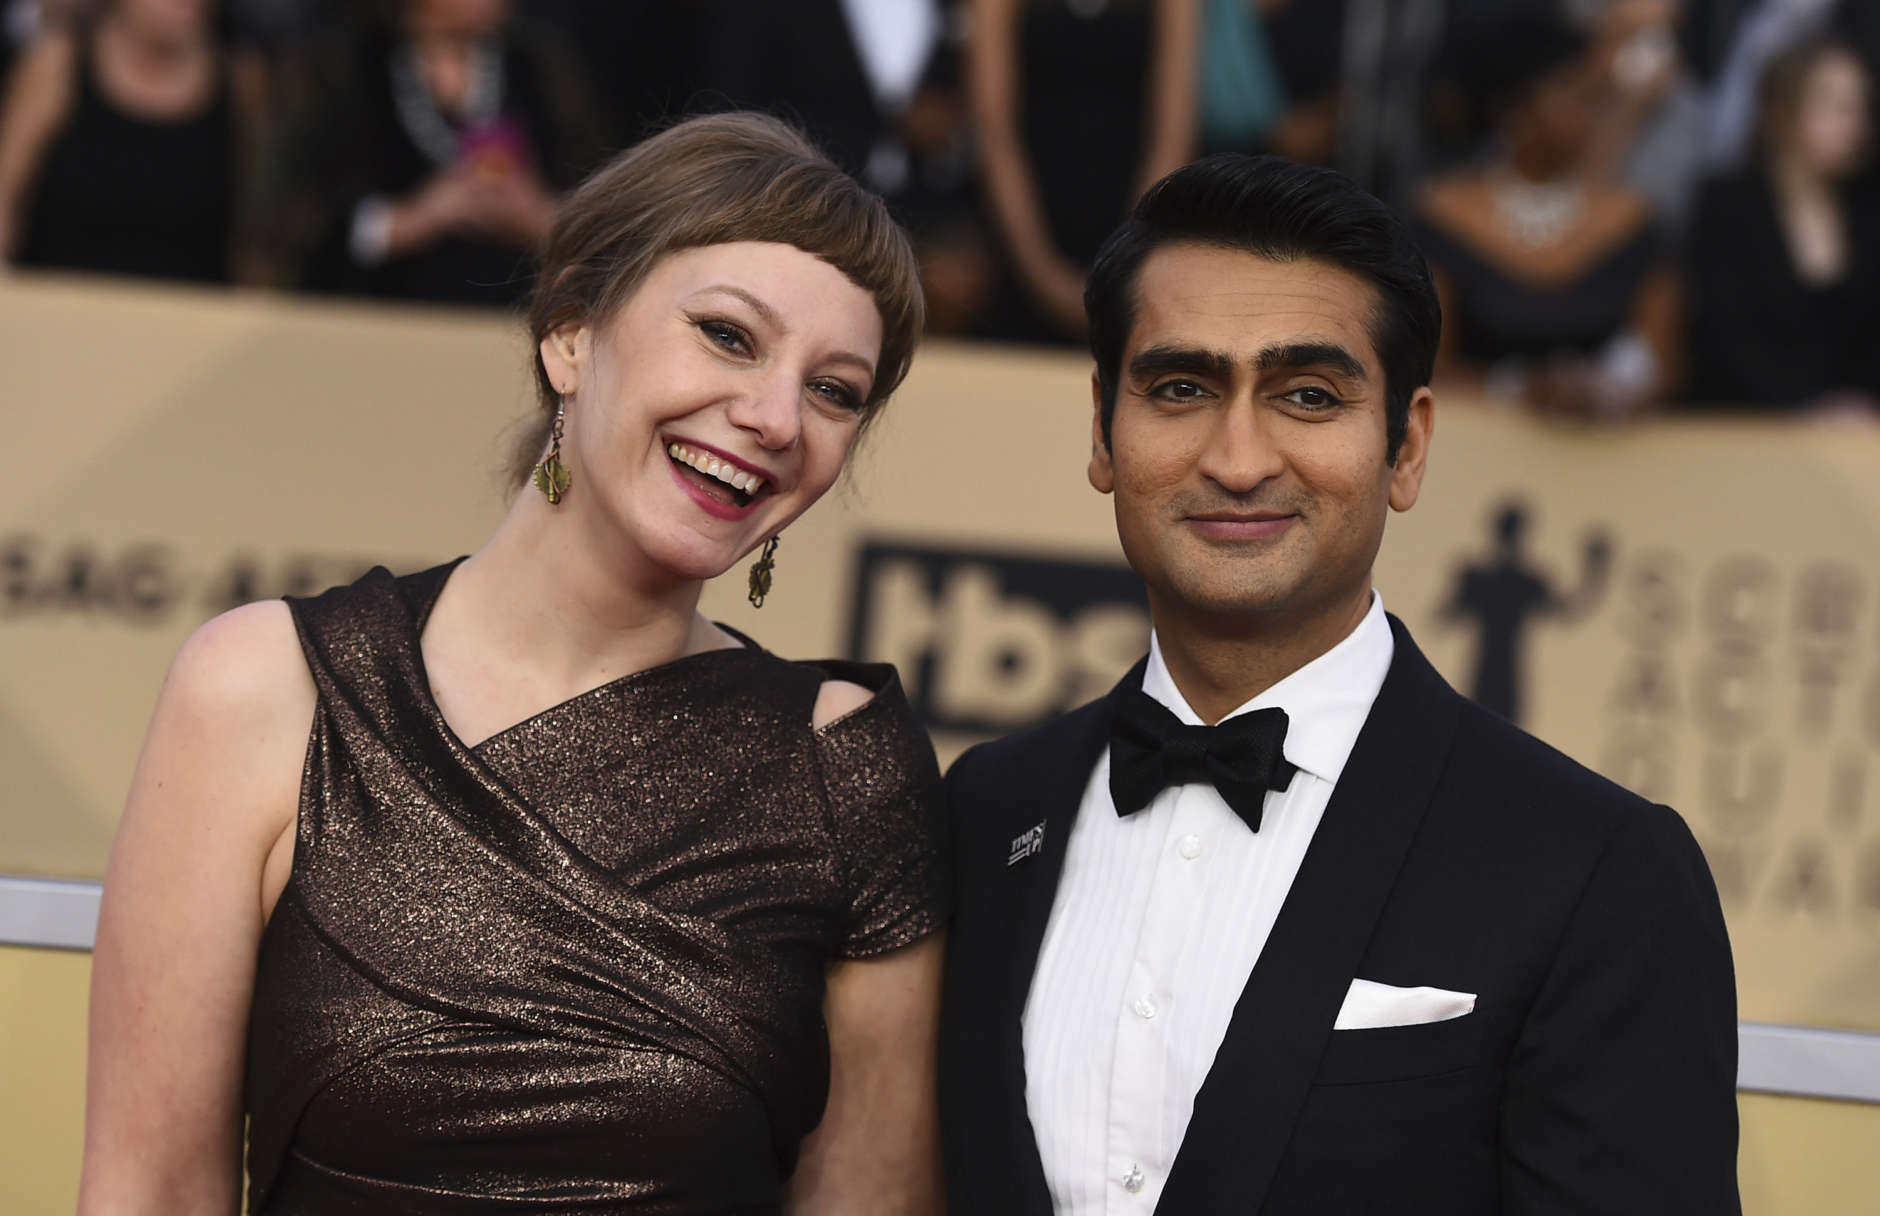 Kumail Nanjiani, left, and Emily V. Gordon arrive at the 24th annual Screen Actors Guild Awards at the Shrine Auditorium &amp; Expo Hall on Sunday, Jan. 21, 2018, in Los Angeles. (Photo by Jordan Strauss/Invision/AP)